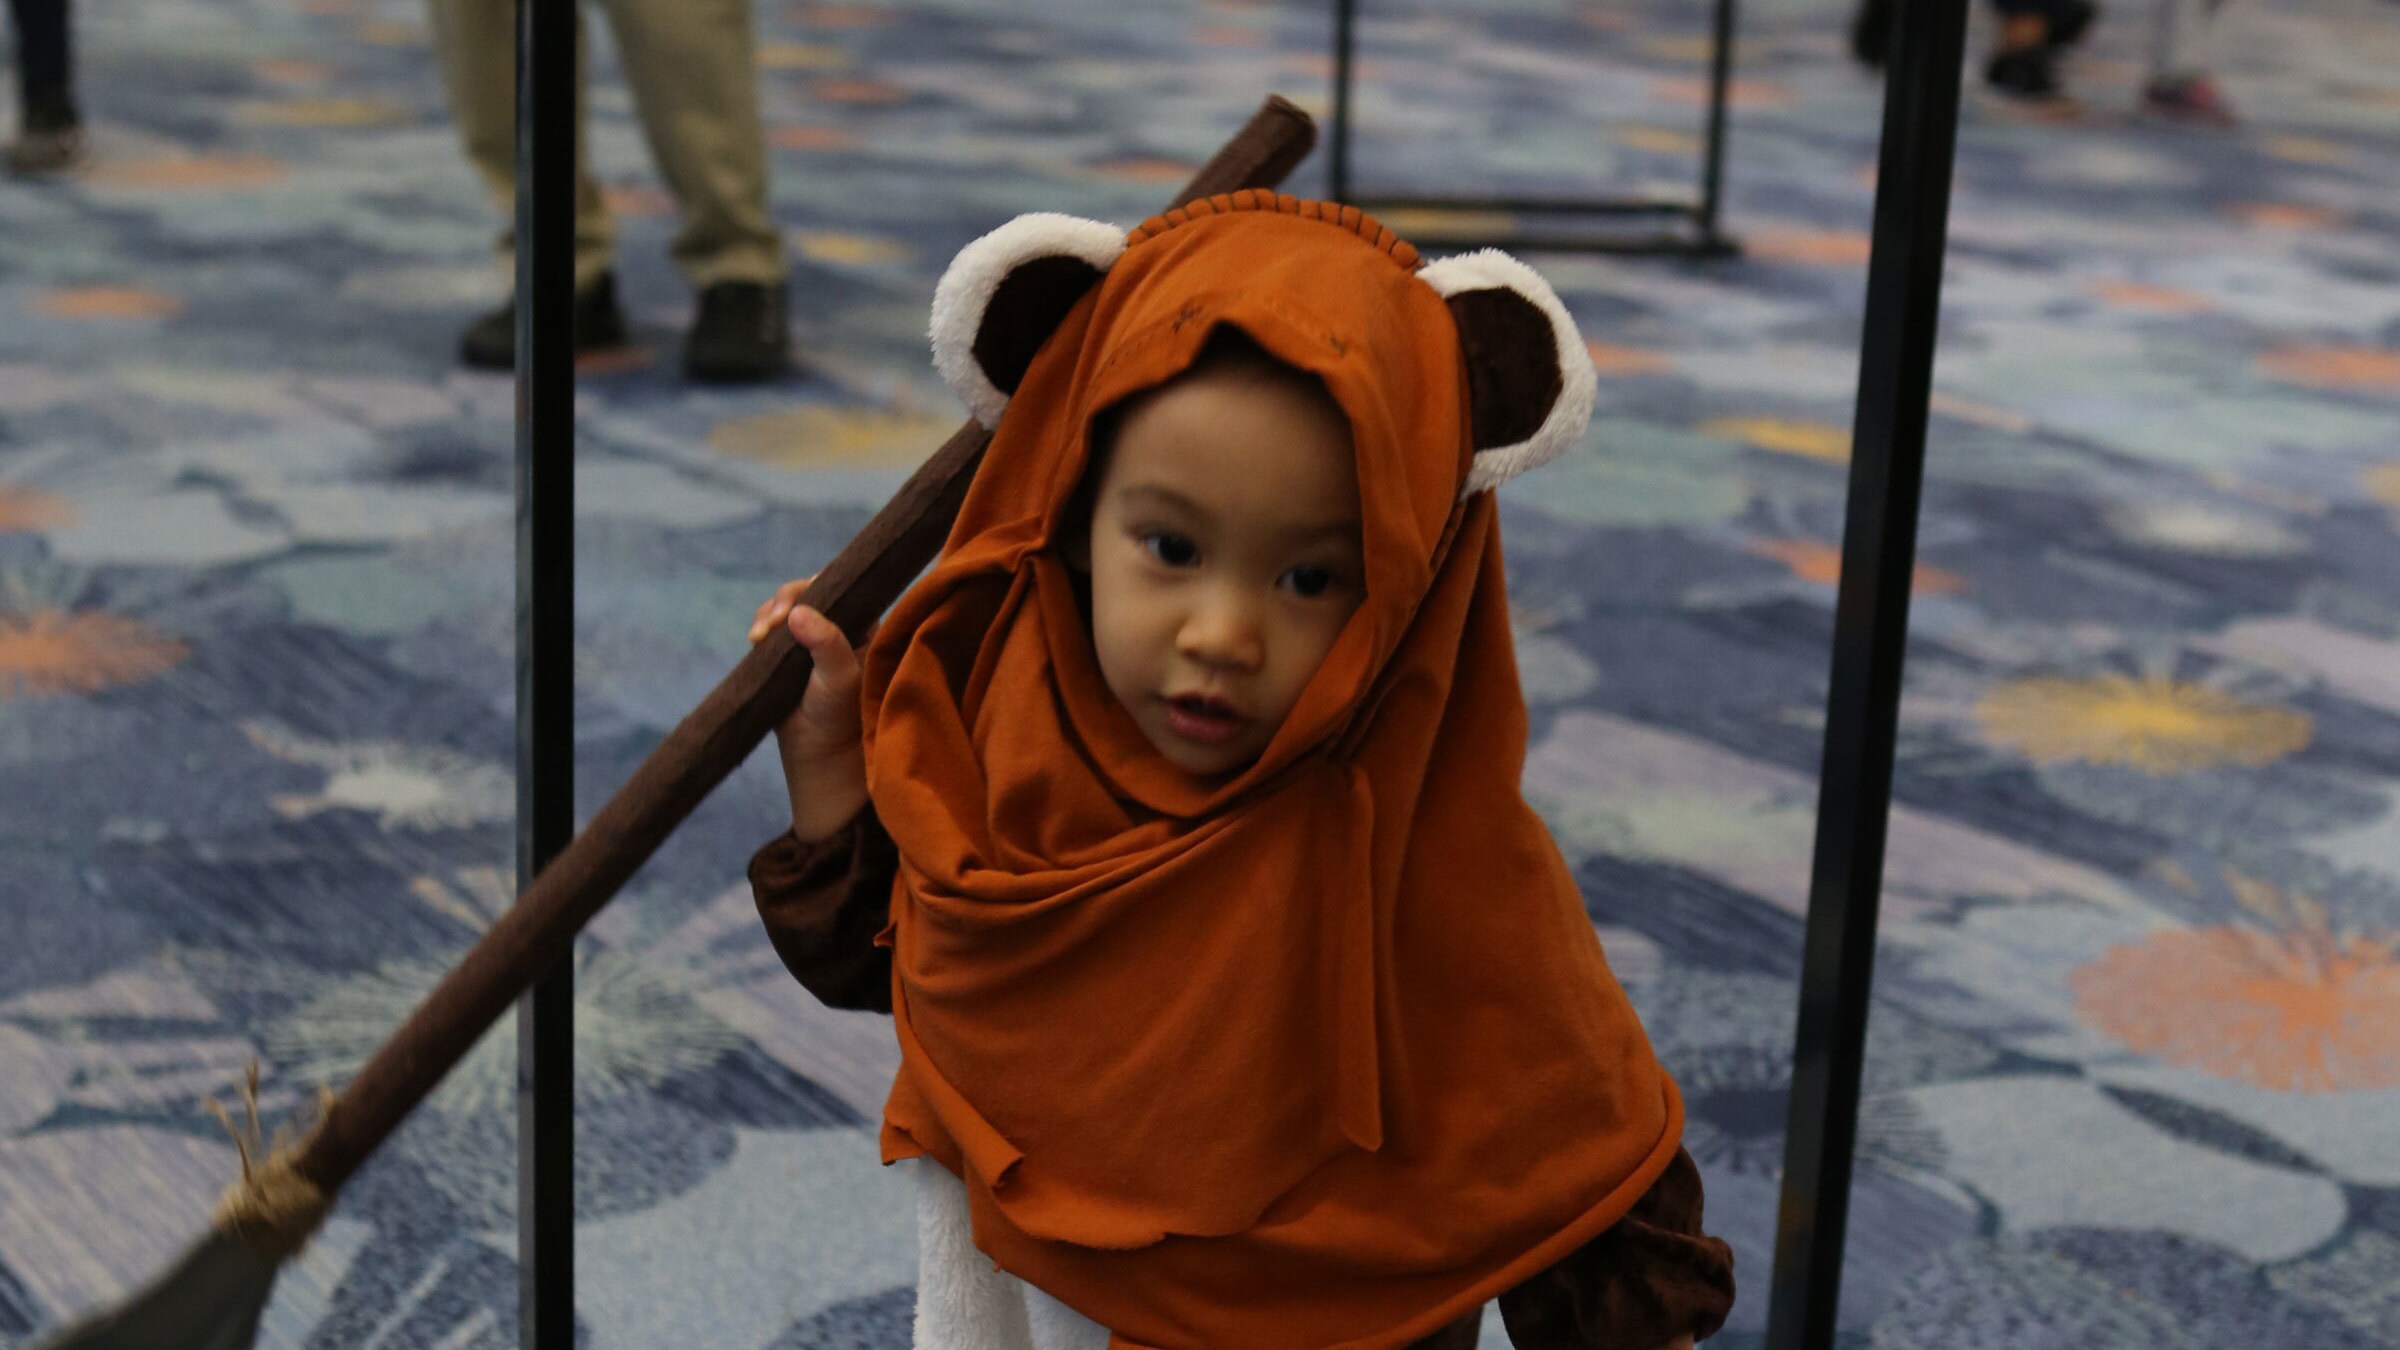 Parenting Padawans: 10 Tips for Taking Kids to Conventions